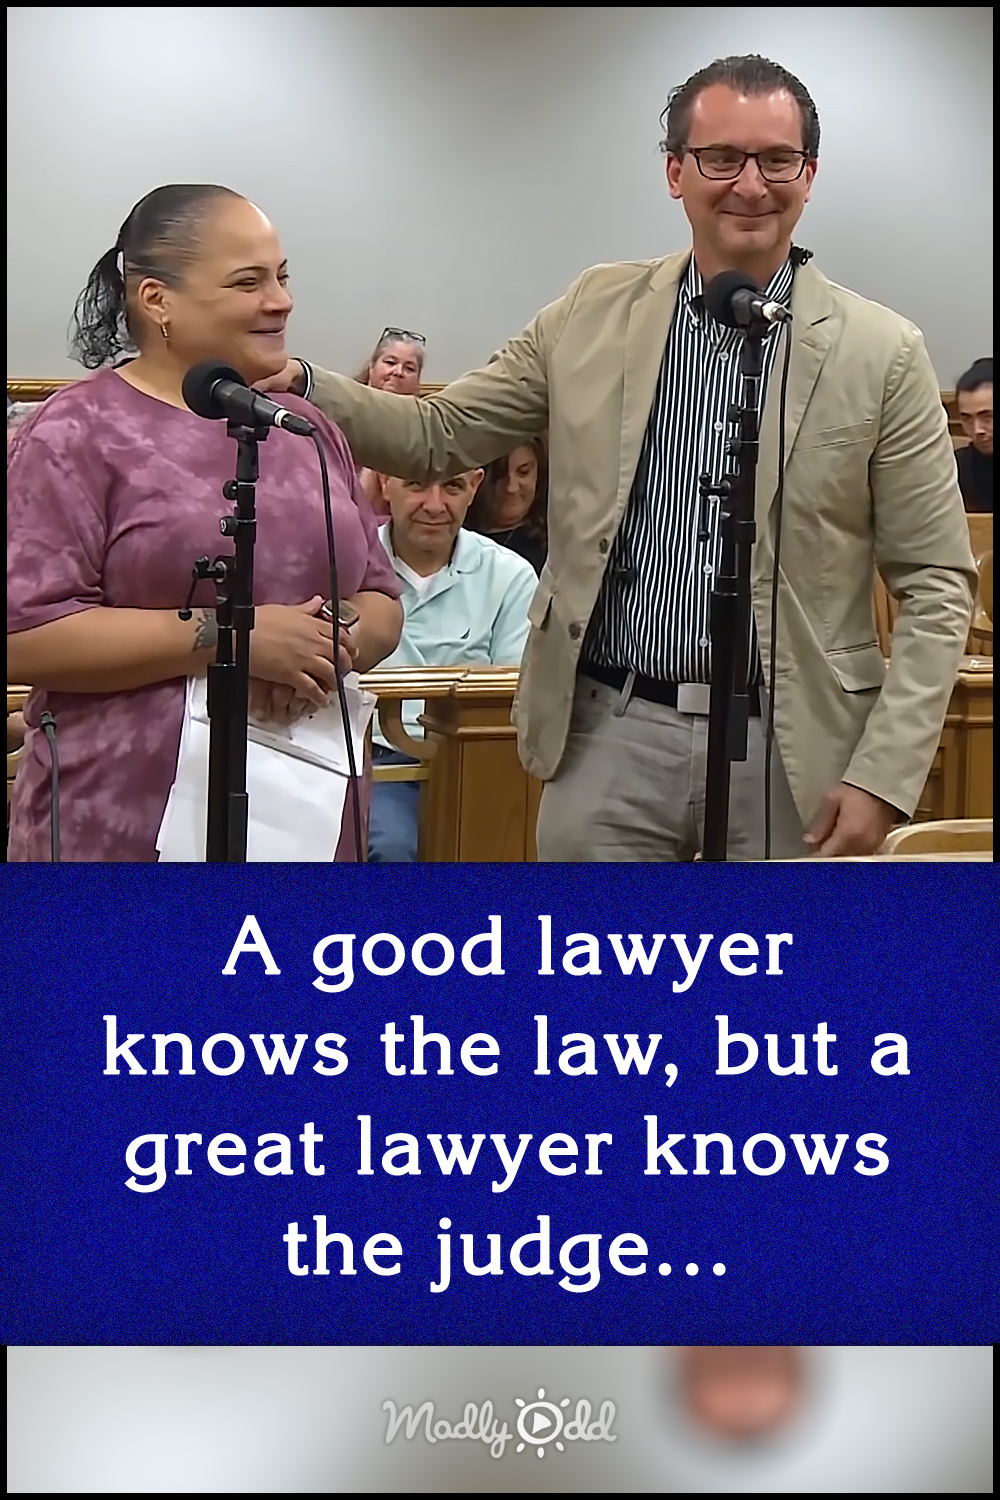 A good lawyer knows the law, but a great lawyer knows the judge...